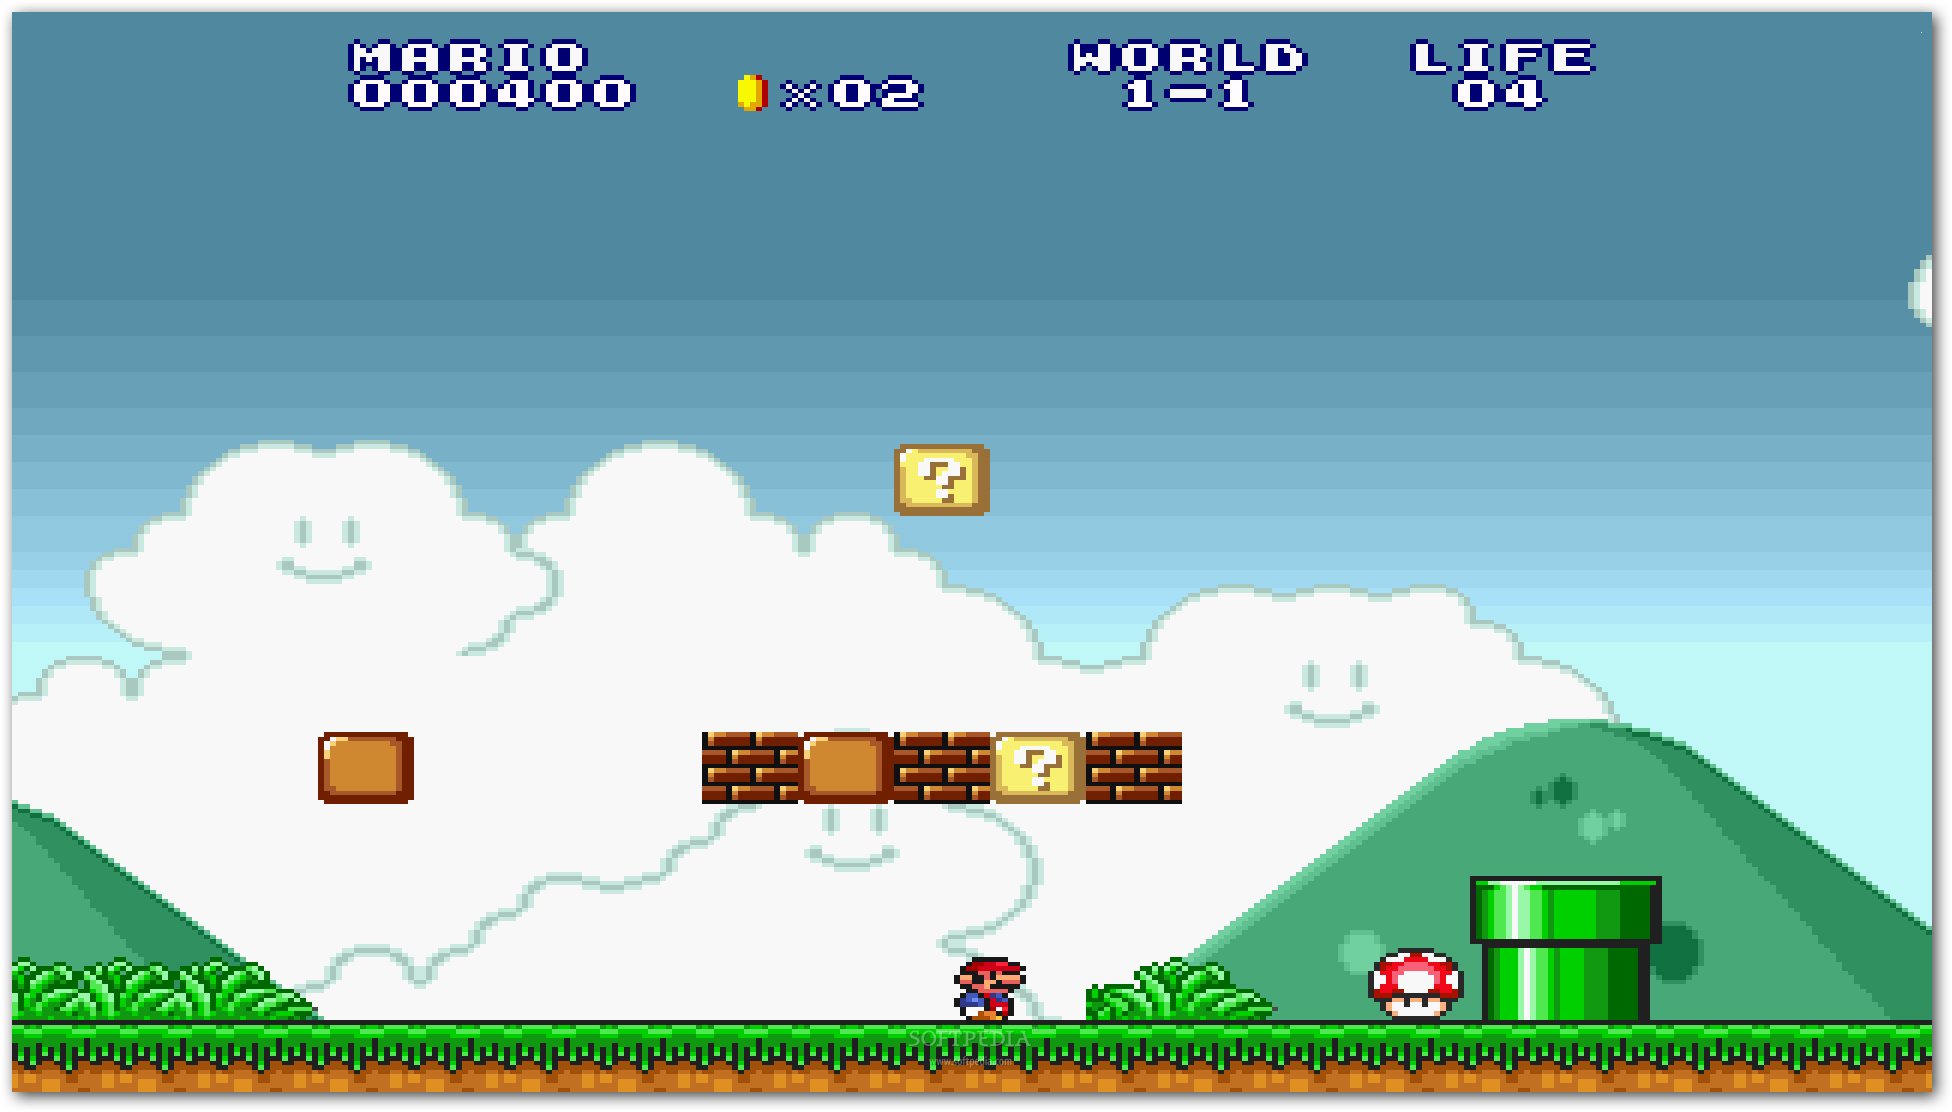 How to download super mario bros 2 for pc - werablogger